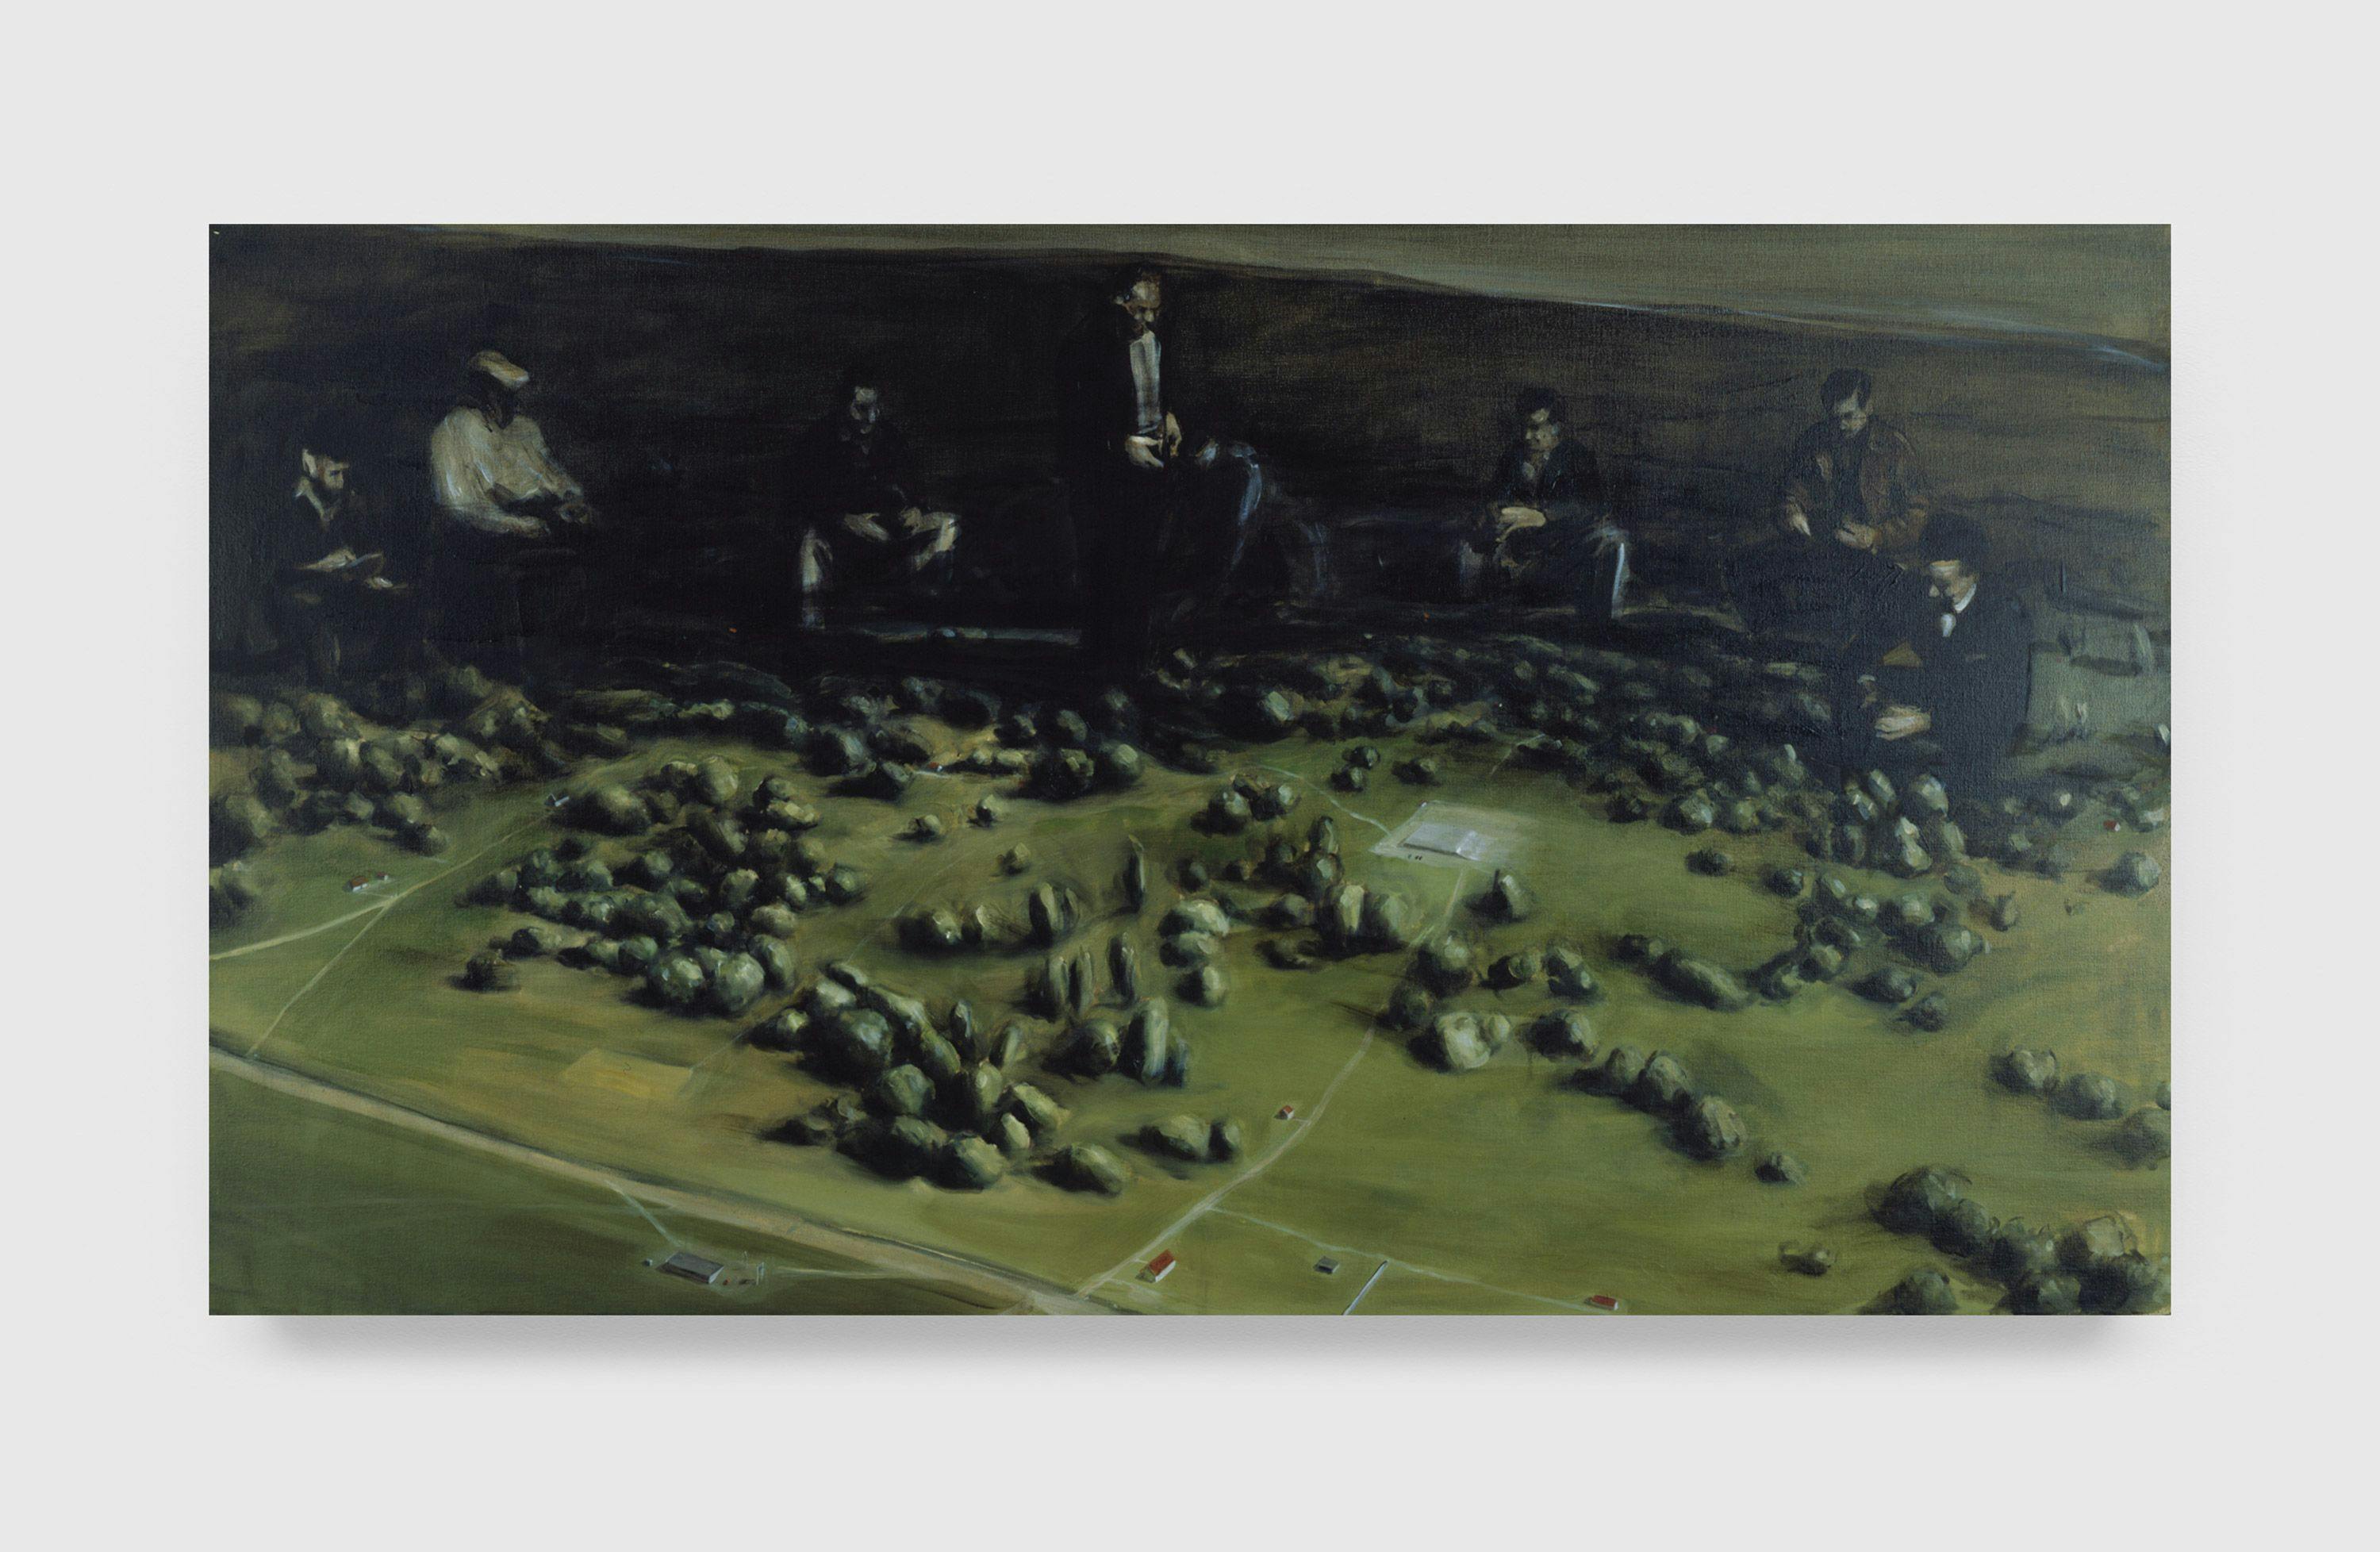 A painting by Michaël Borremans, titled Trickland (II-Large), dated 2002.